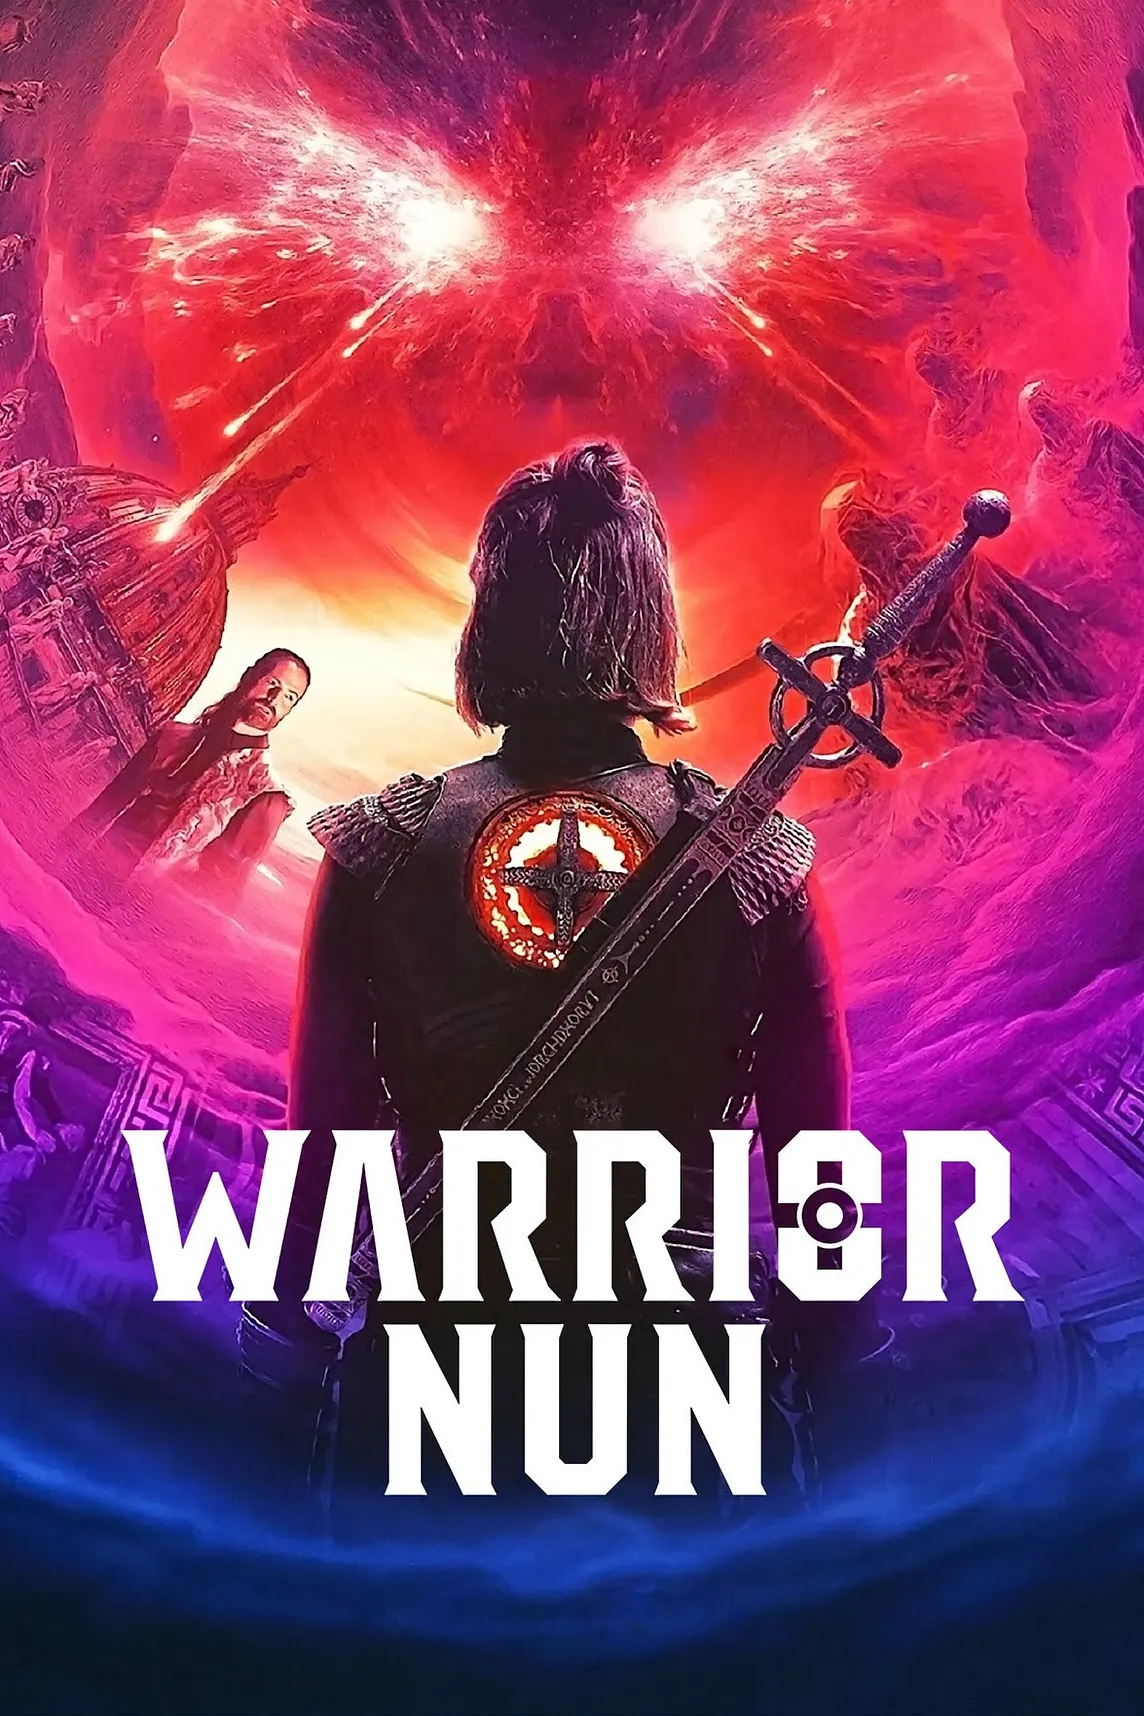 Promo cover for Warrior Nun season two, with Warrior Nun written in large font, all-caps. Ava’s back is to us, a sword across her back, the halo glowing on her back. There is a pink and purple swirl around the image, becoming red towards the center. Adriel stands to the left in the midst of it. On the right is three cloaked figures, their identities indescernible.